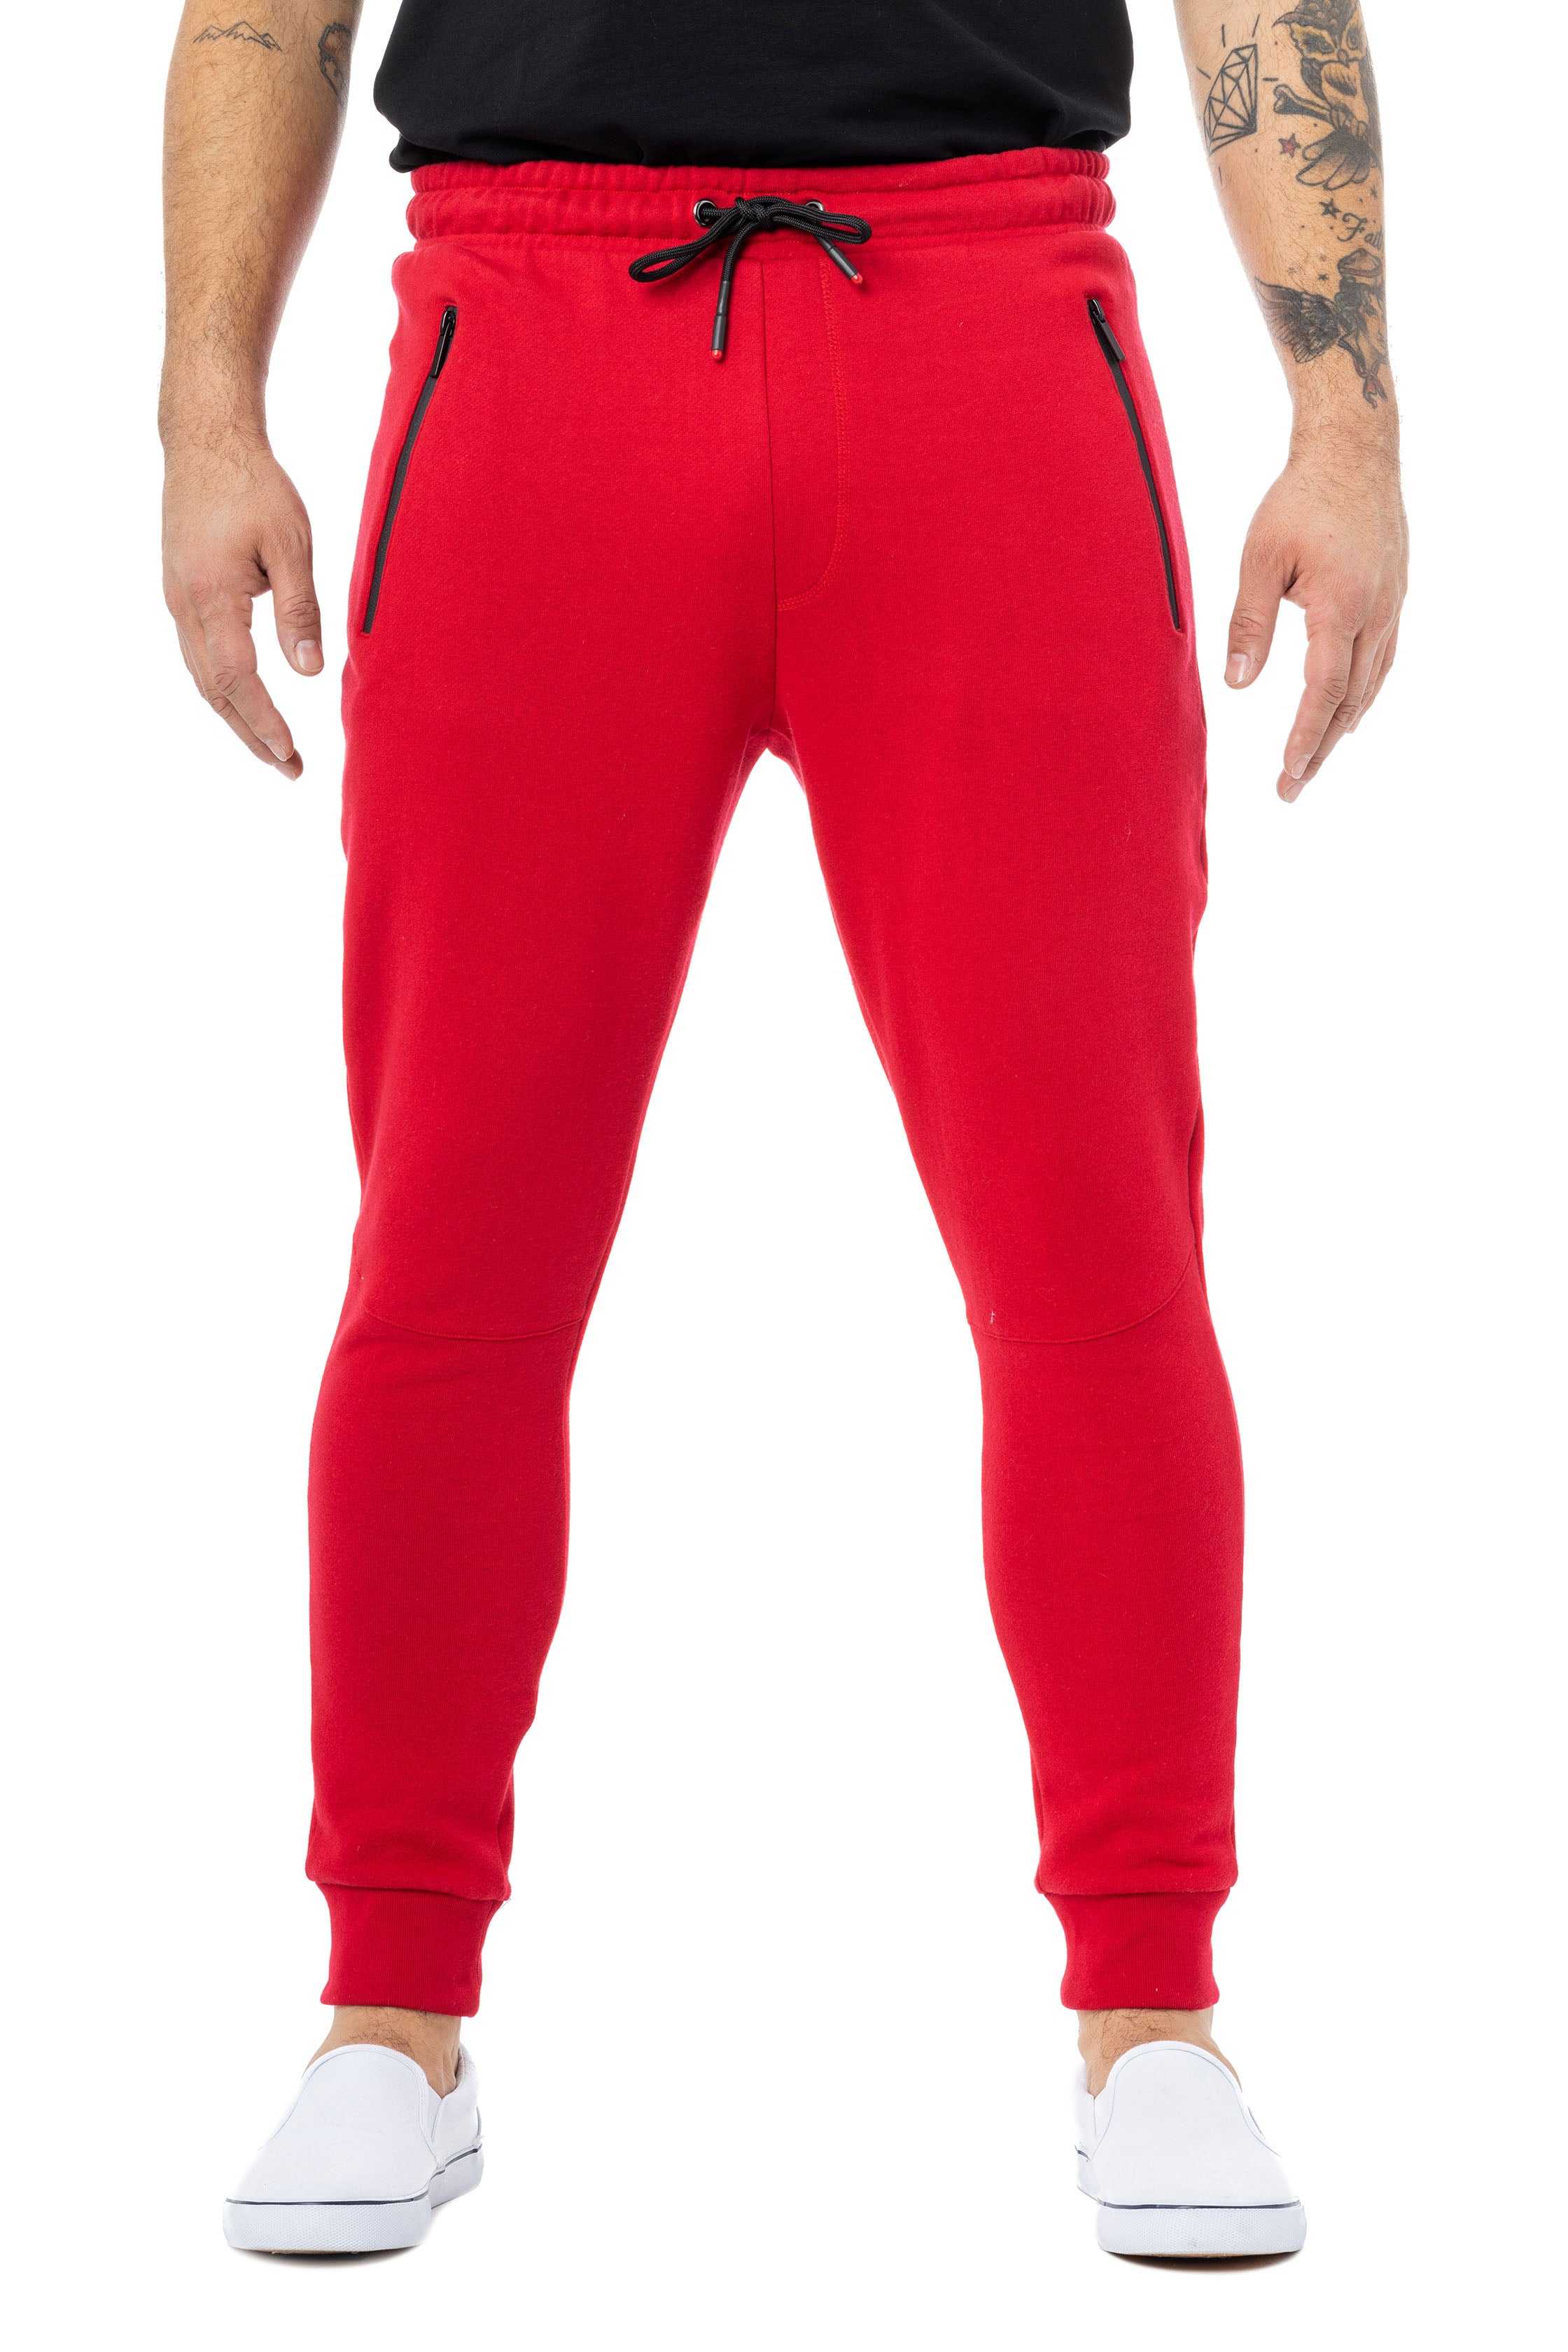 YWDJ Joggers for Men Men And Women Contrast Jogging Pants Fitness Sports  Pants Casual Pants Red XS